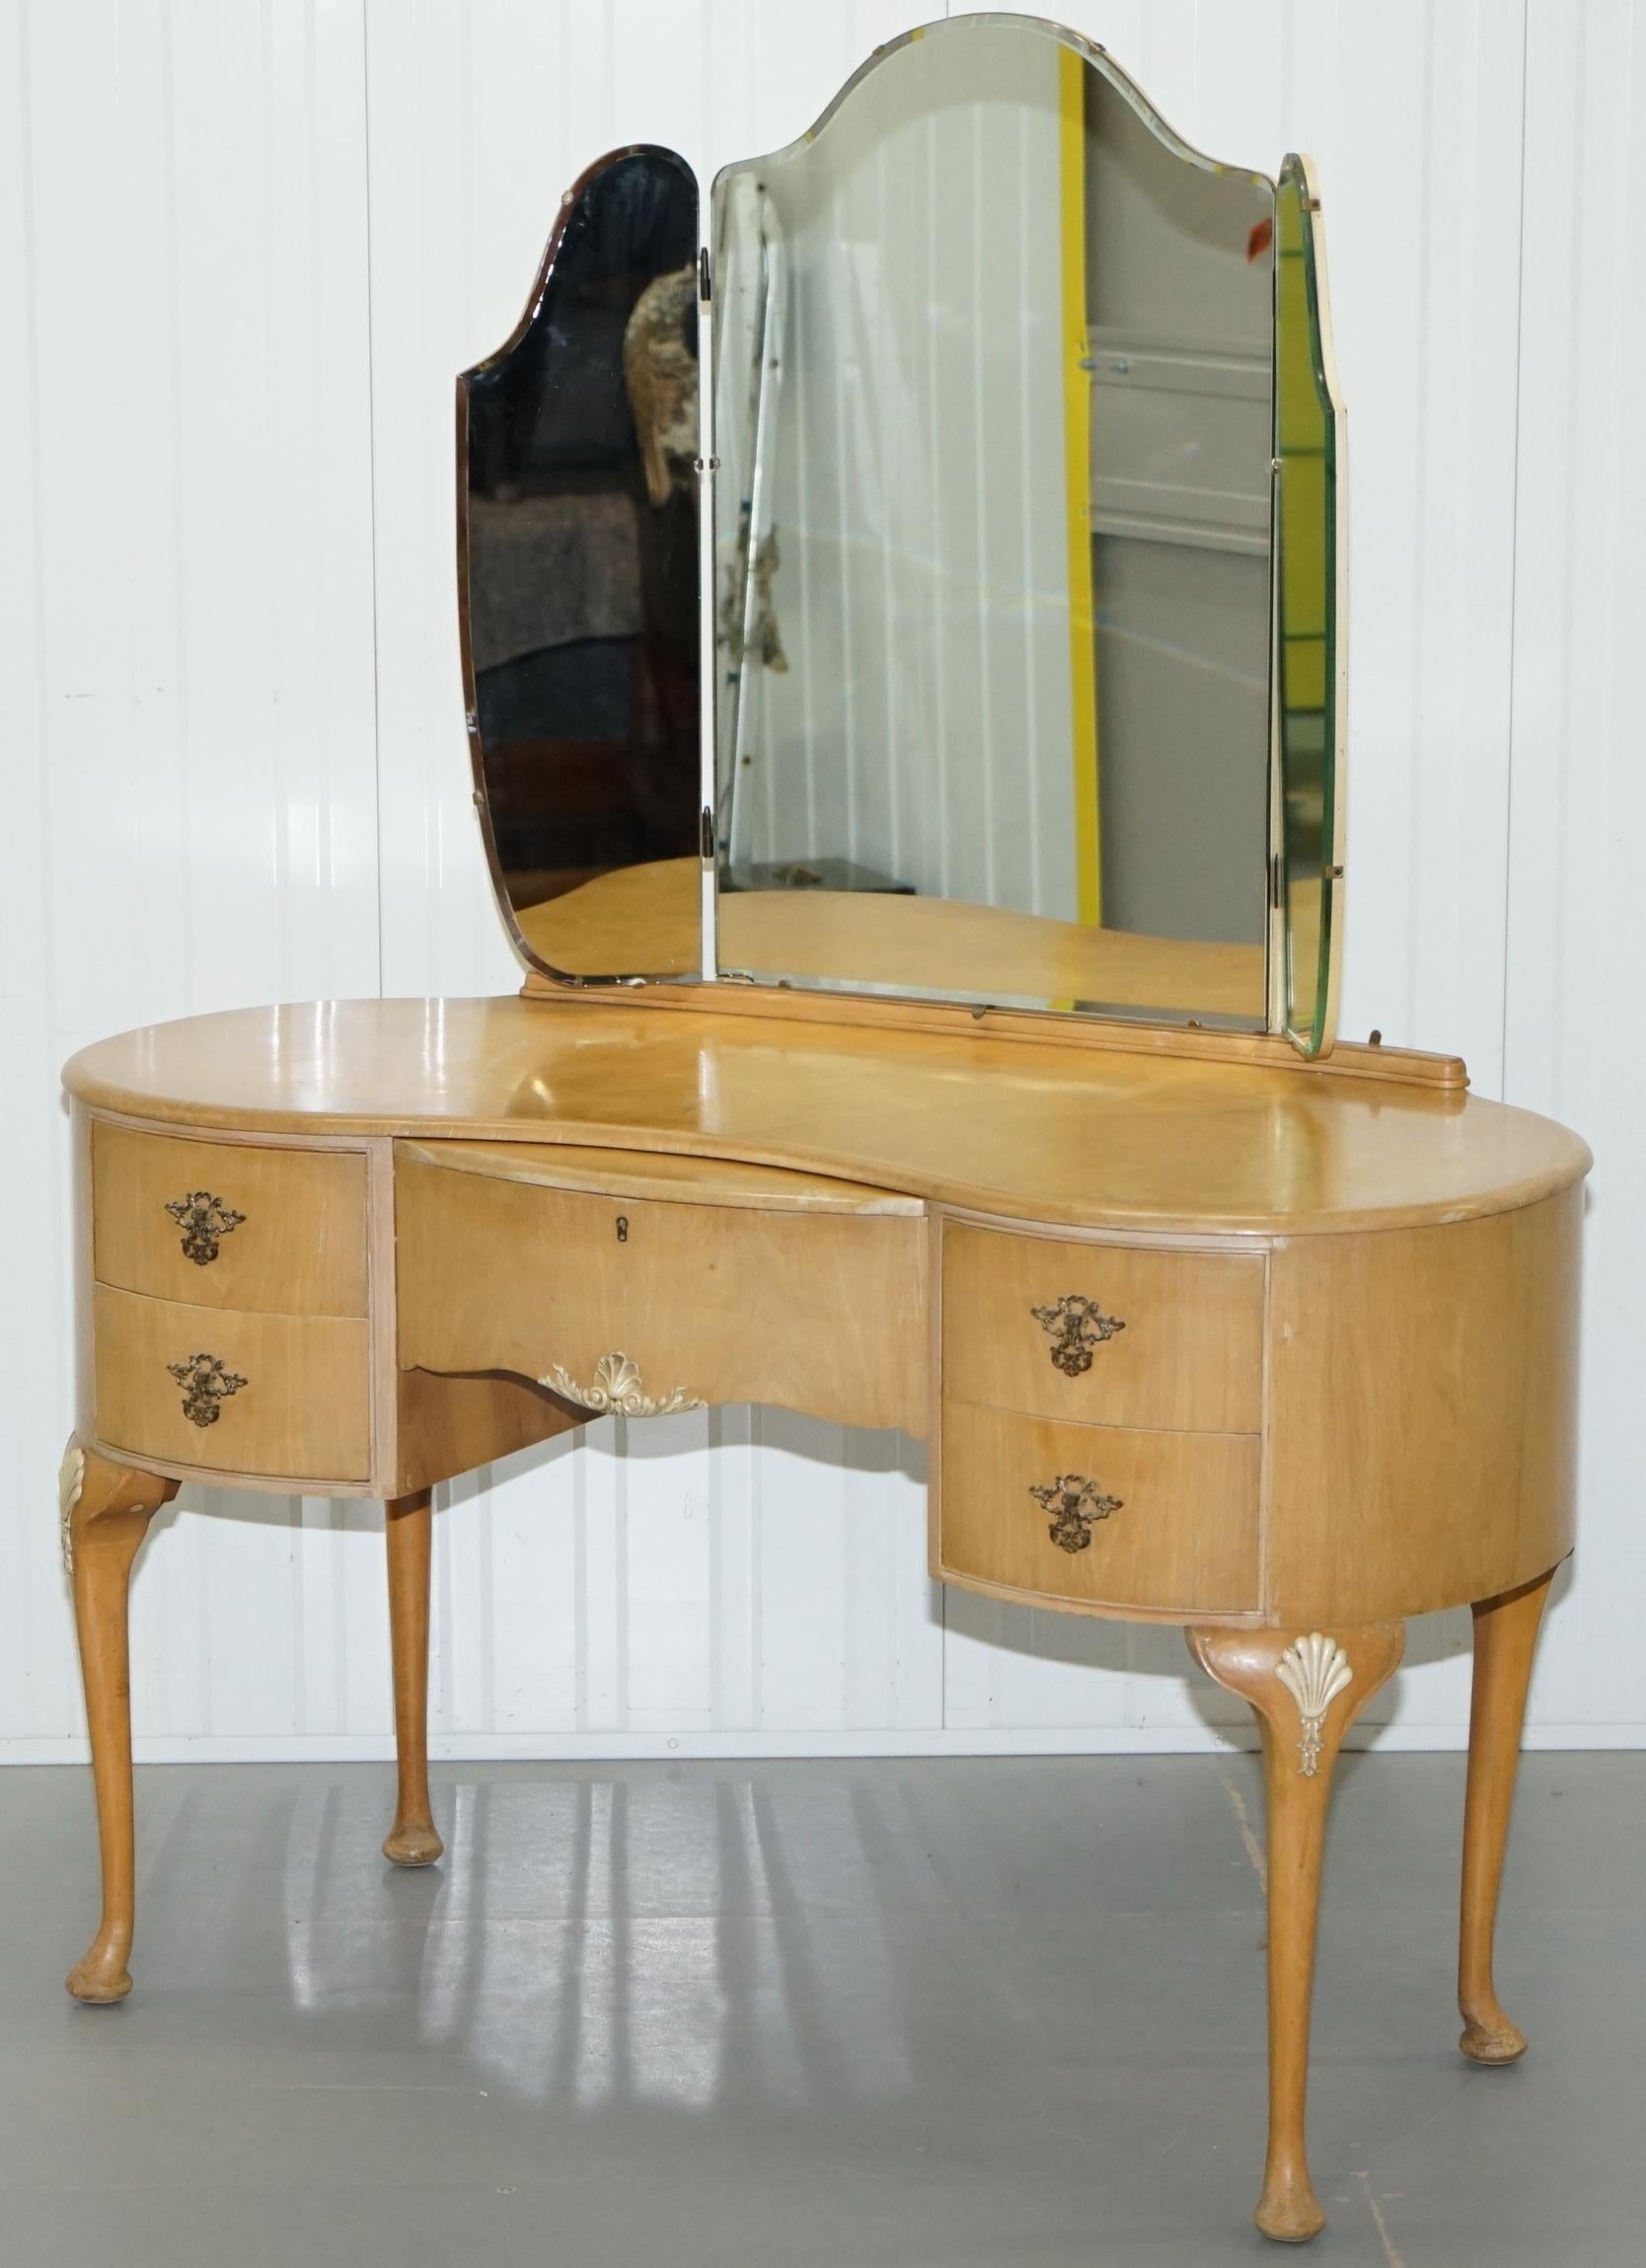 We are delighted to offer for sale this lovely handmade in England Walnut Works London Art Deco dressing table with Tri-fold mirrors

A very good looking and well-made piece, the typical kidney shape which is so elegant and timeless

This table